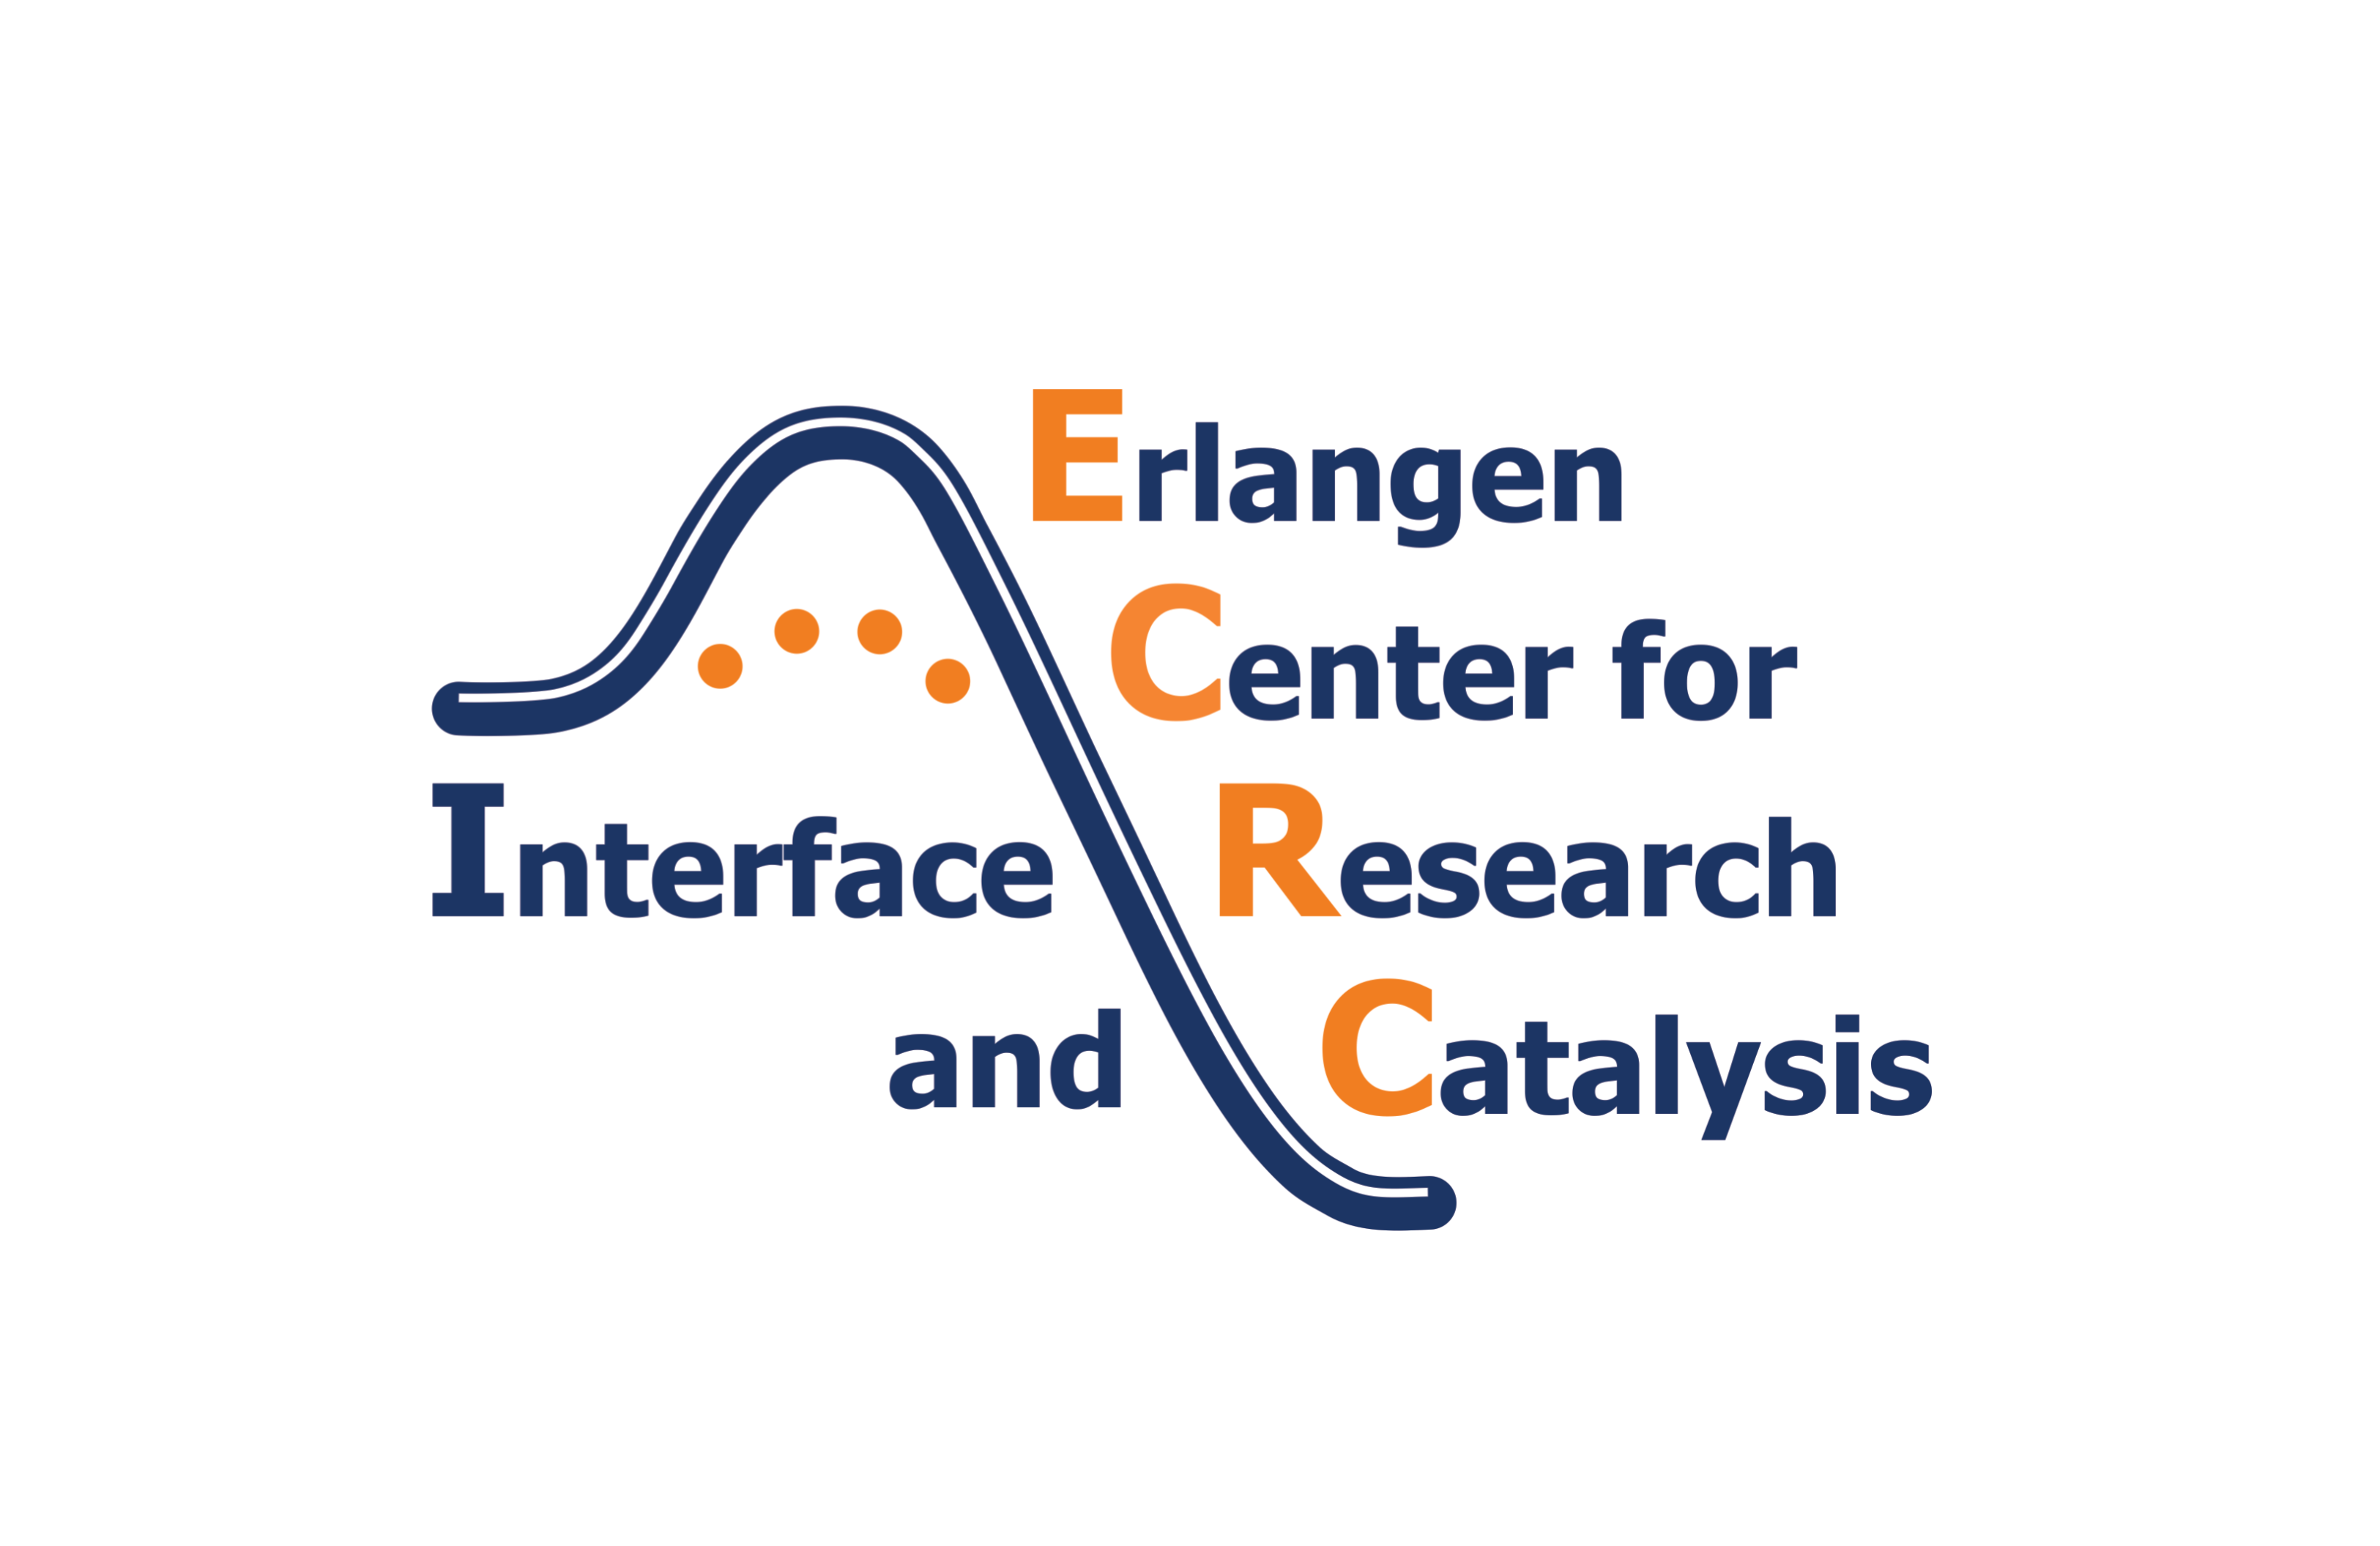 To the page:Erlangen Center for Interface Research and Catalysis